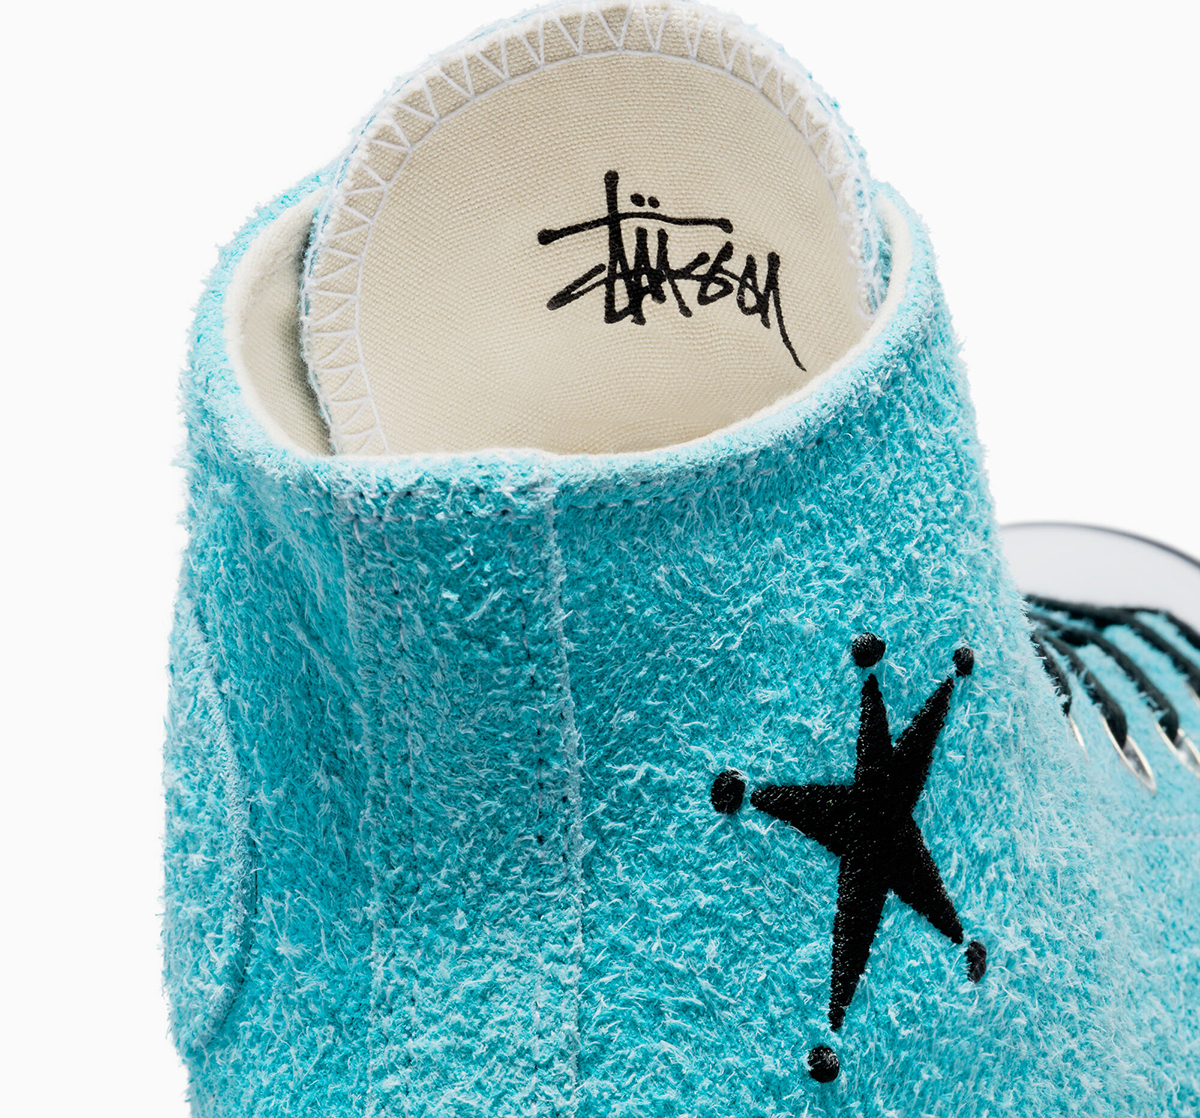 Stussy Converse Chuck Taylor All Star Canvas Shoes Leisure Wear-resistant Non-Slip High Tops 155457C Sky Blue A07663c 6